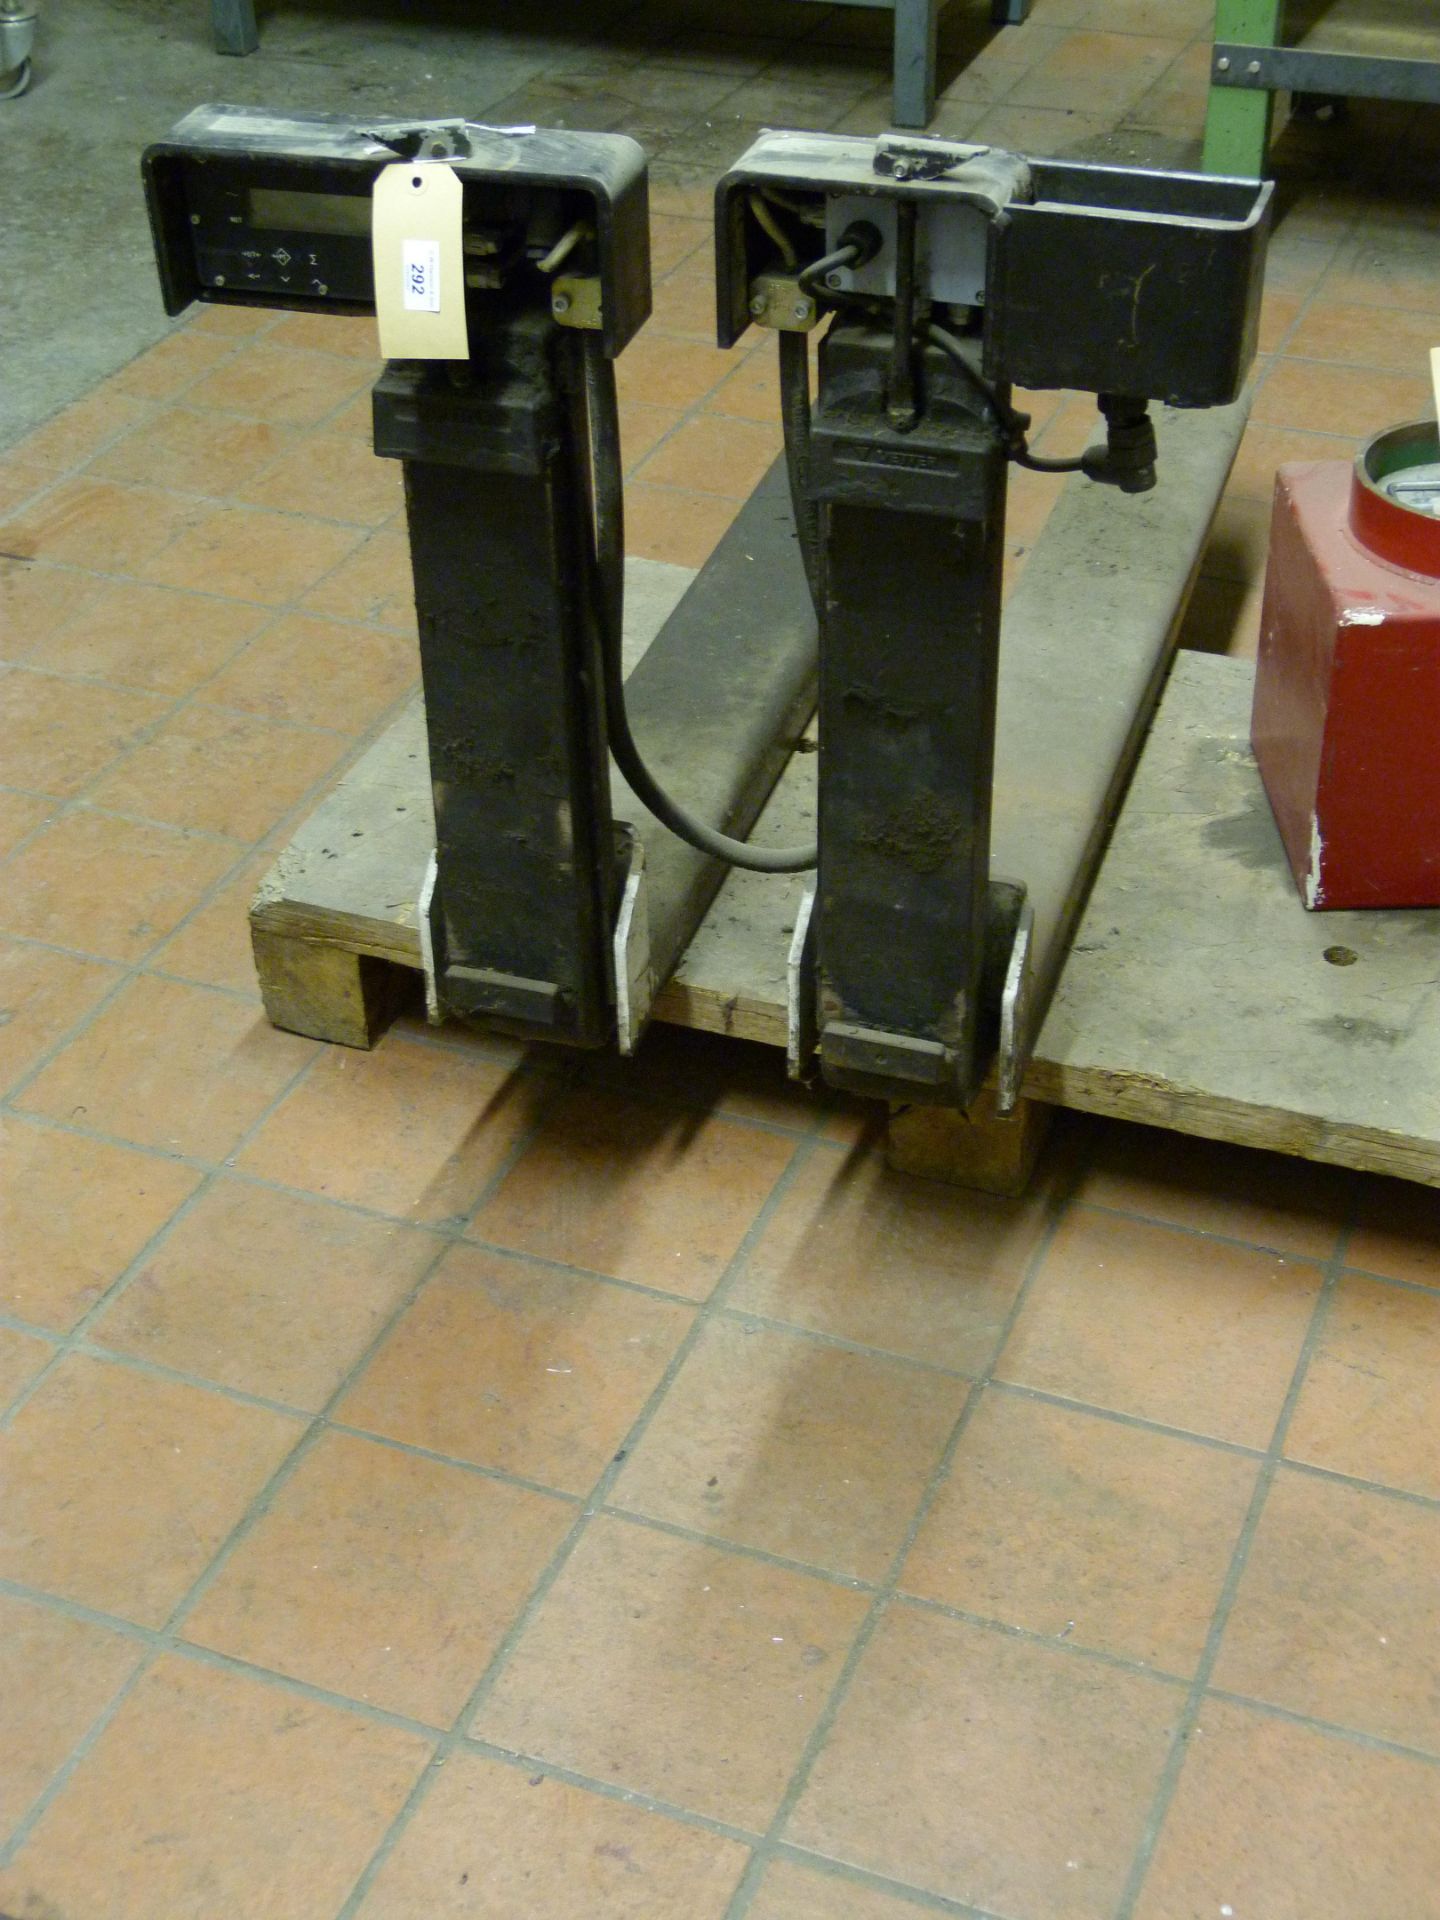 A pair of fork lift forks with Timotex LTD GSF1150 attached scales